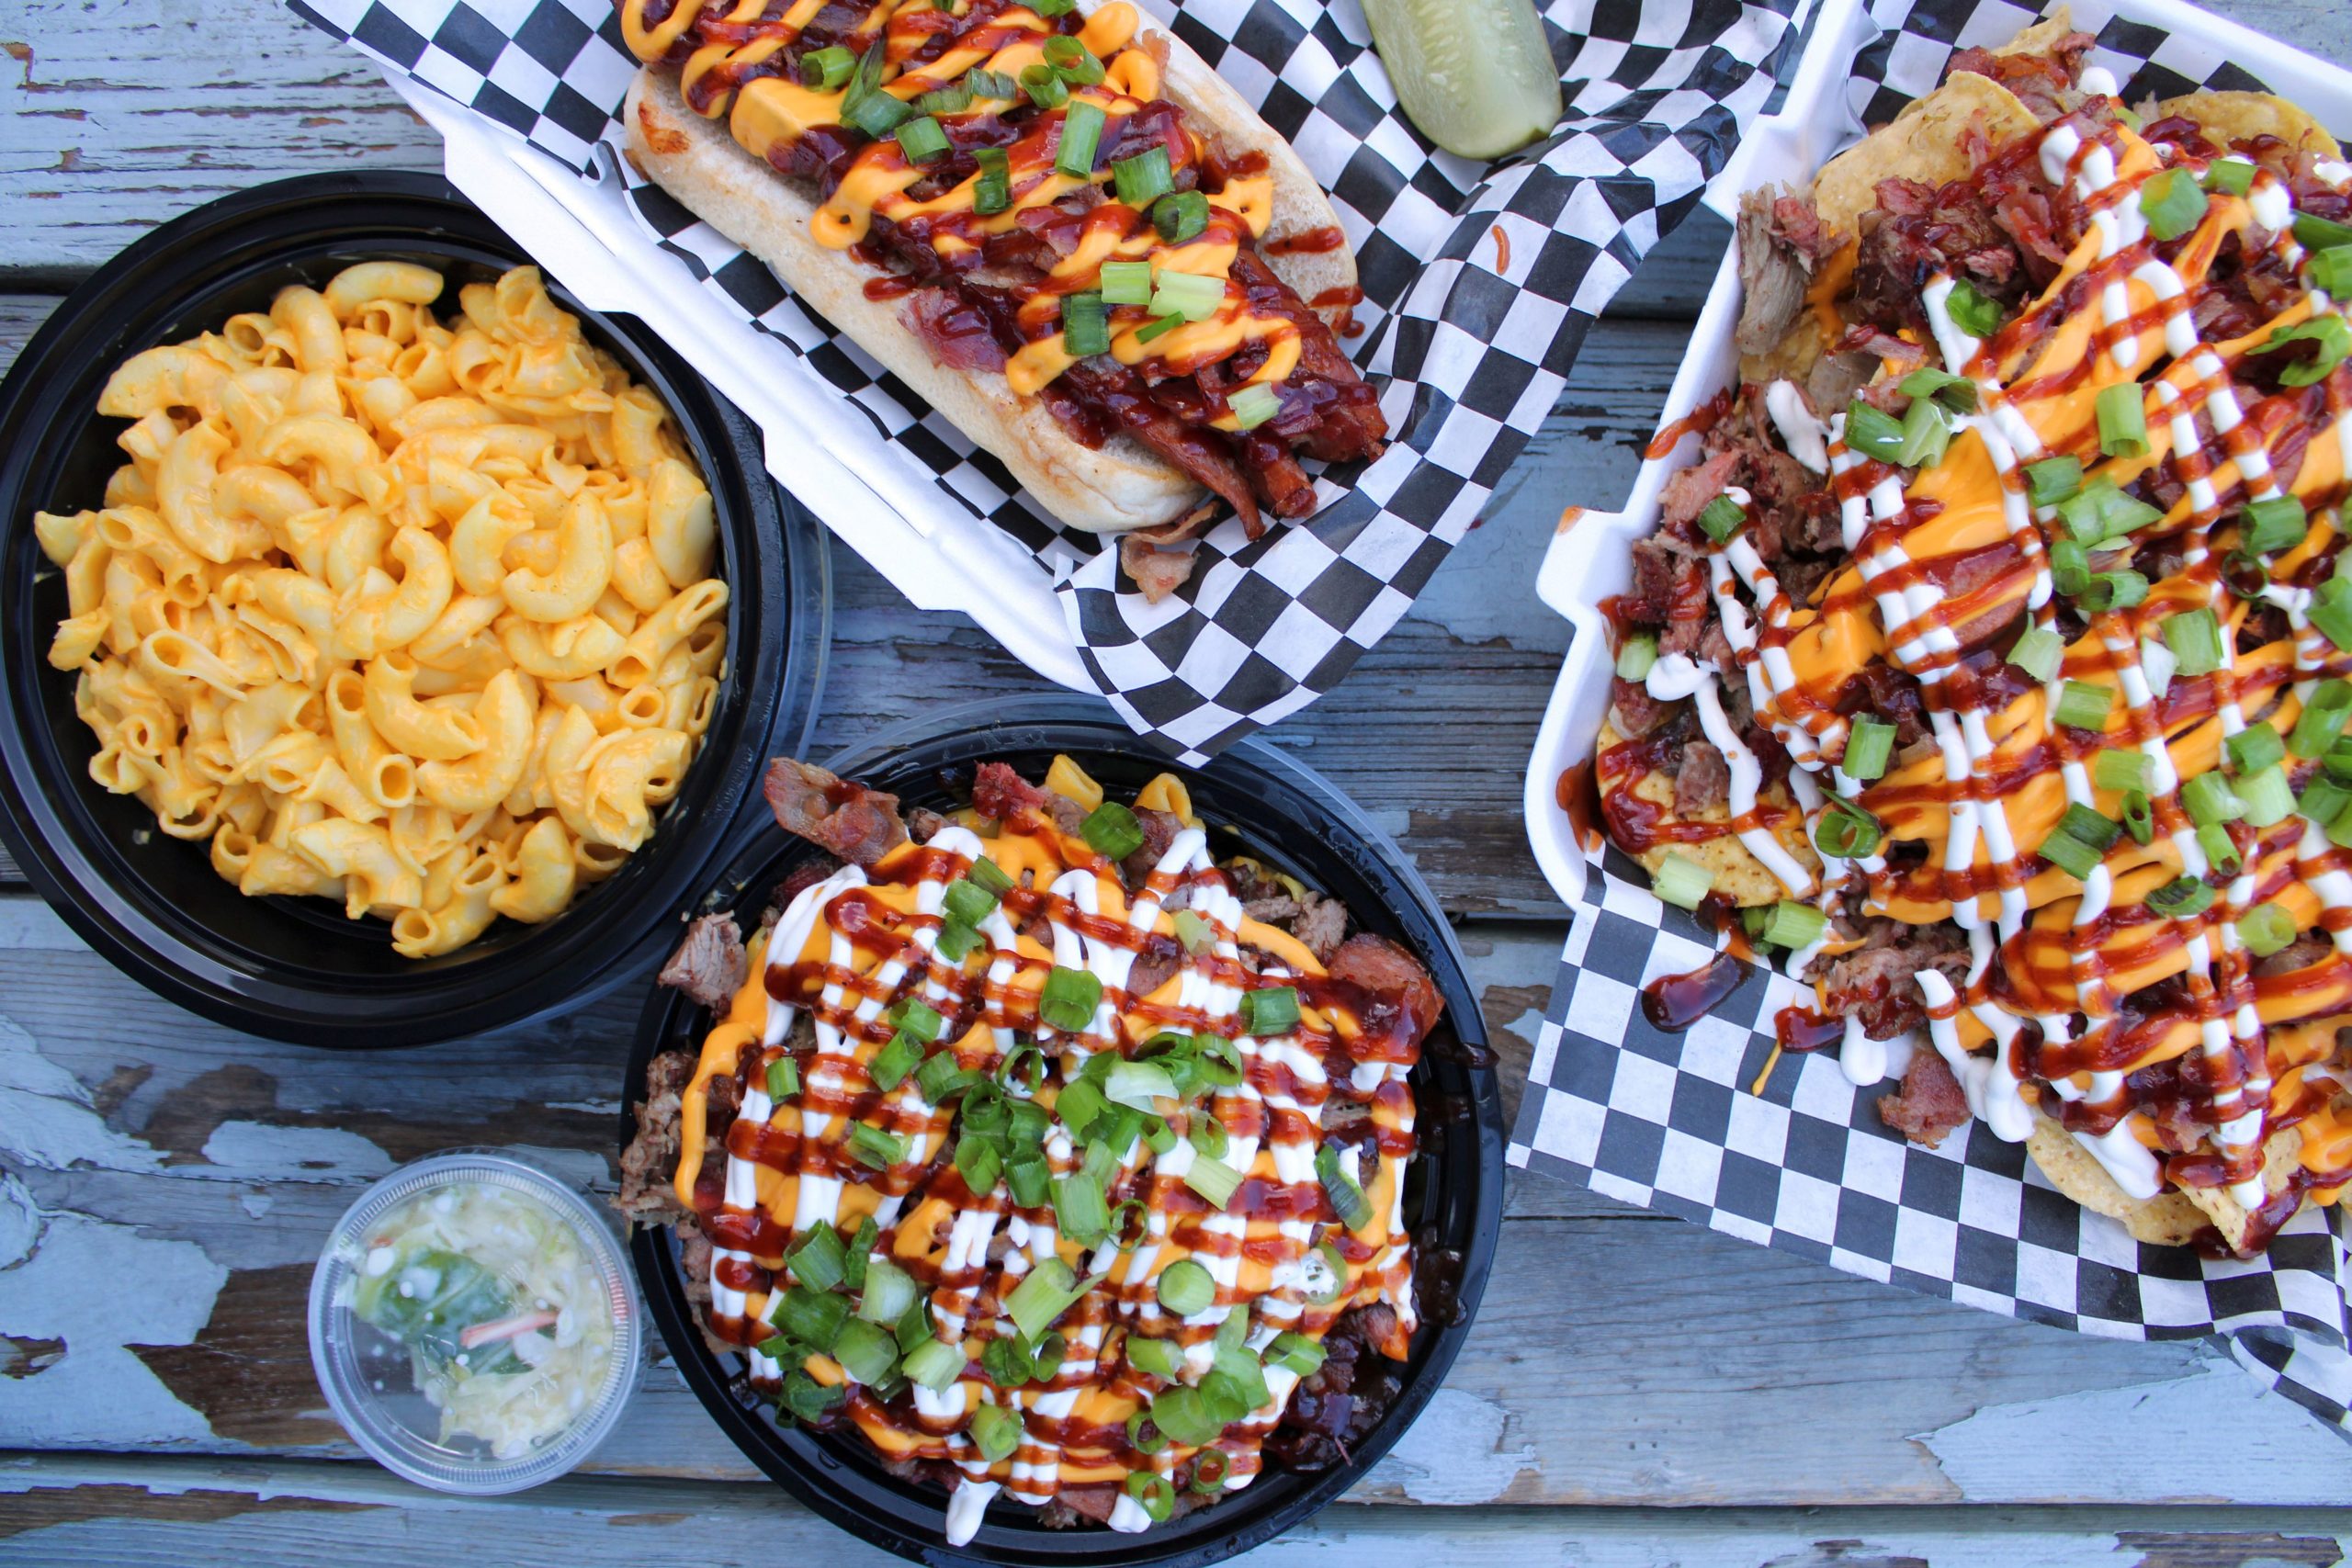 Assorted dishes at Biggie Boy BBQ food truck (Photo by Mark Whittaker)